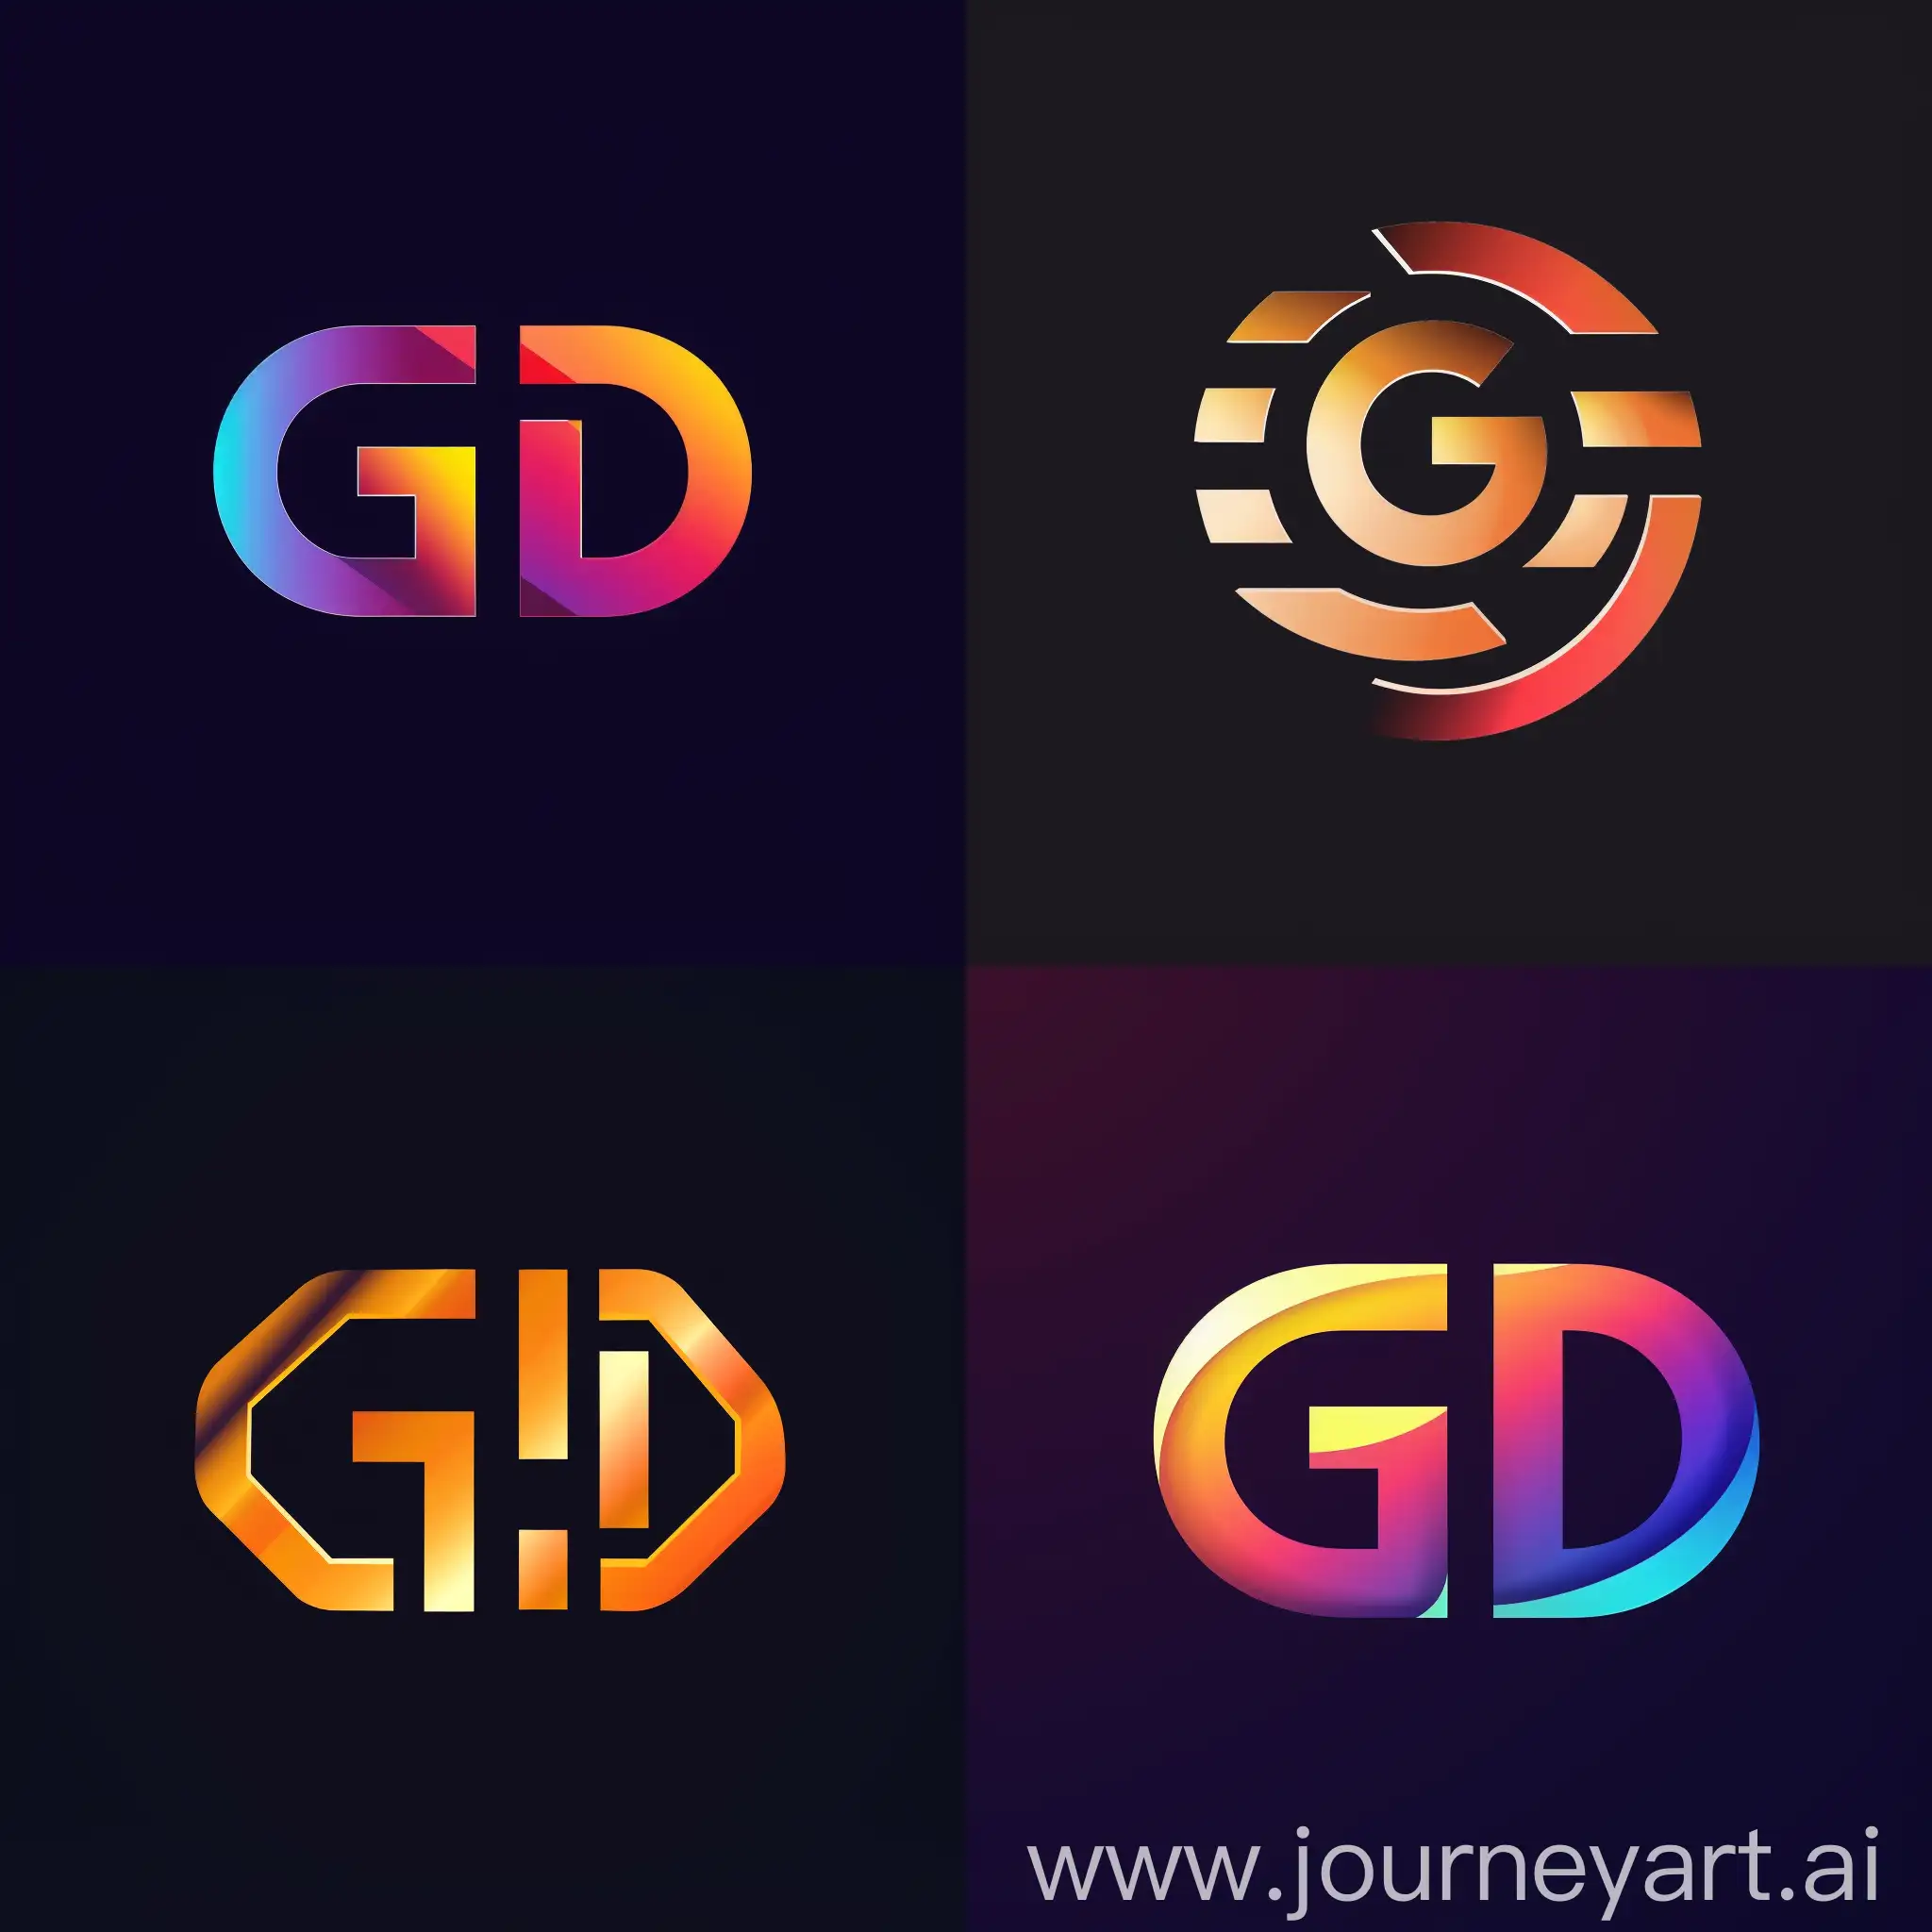 You need to create a logo that contains G and D that conveys your passion for video design
